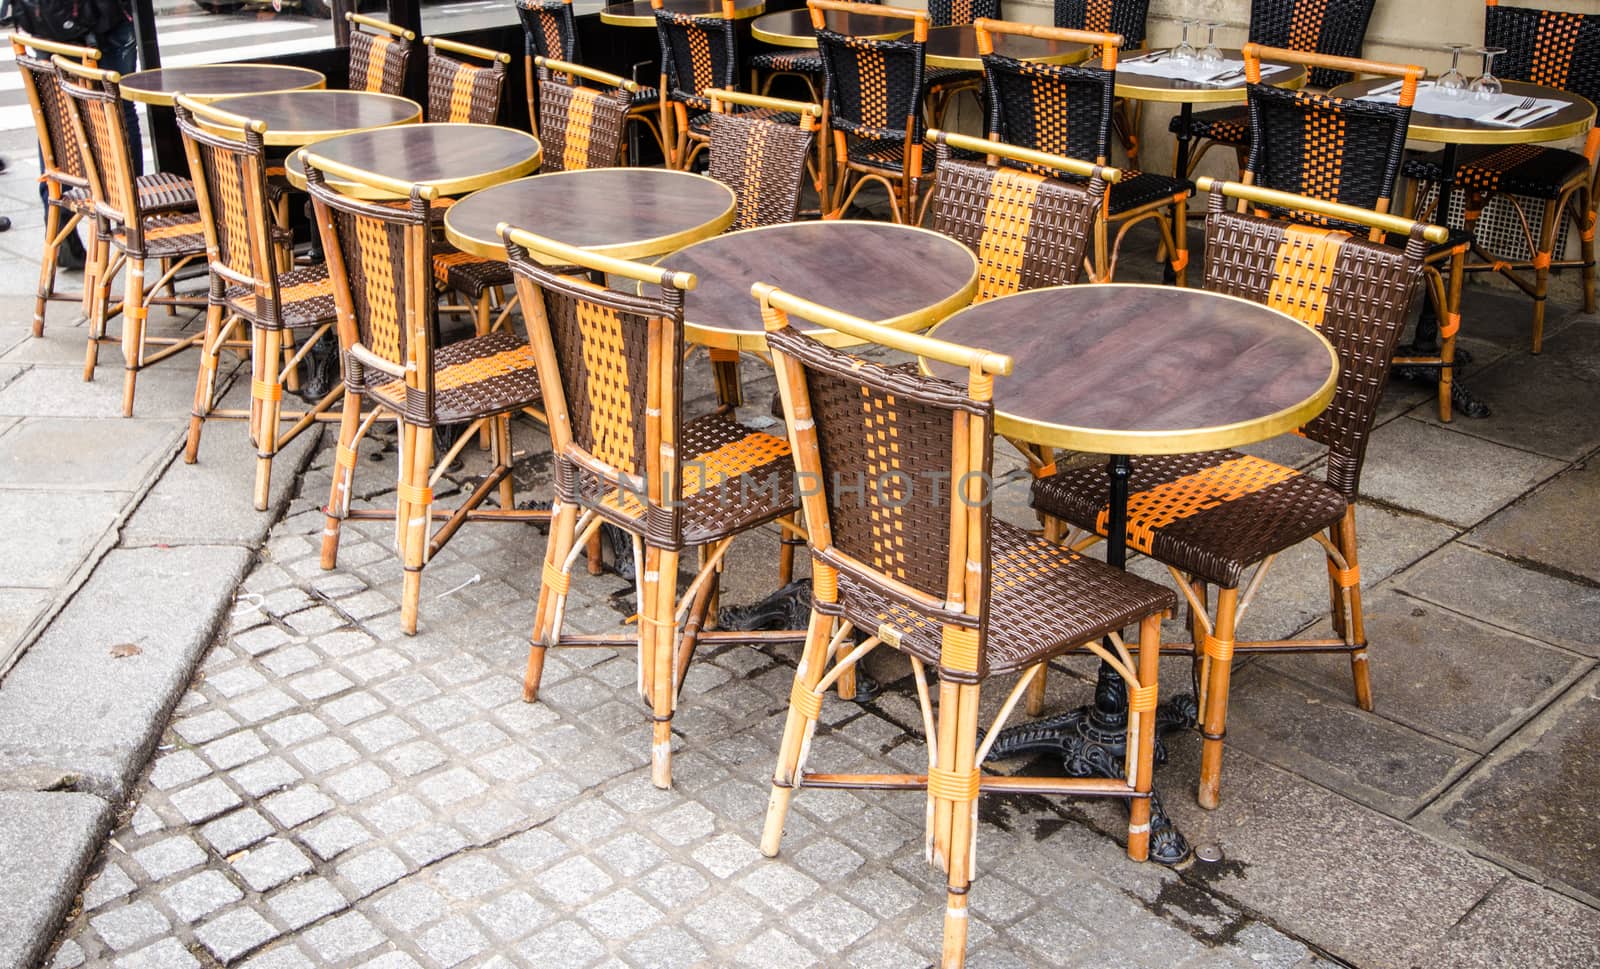 Chairs on the city street of Paris.